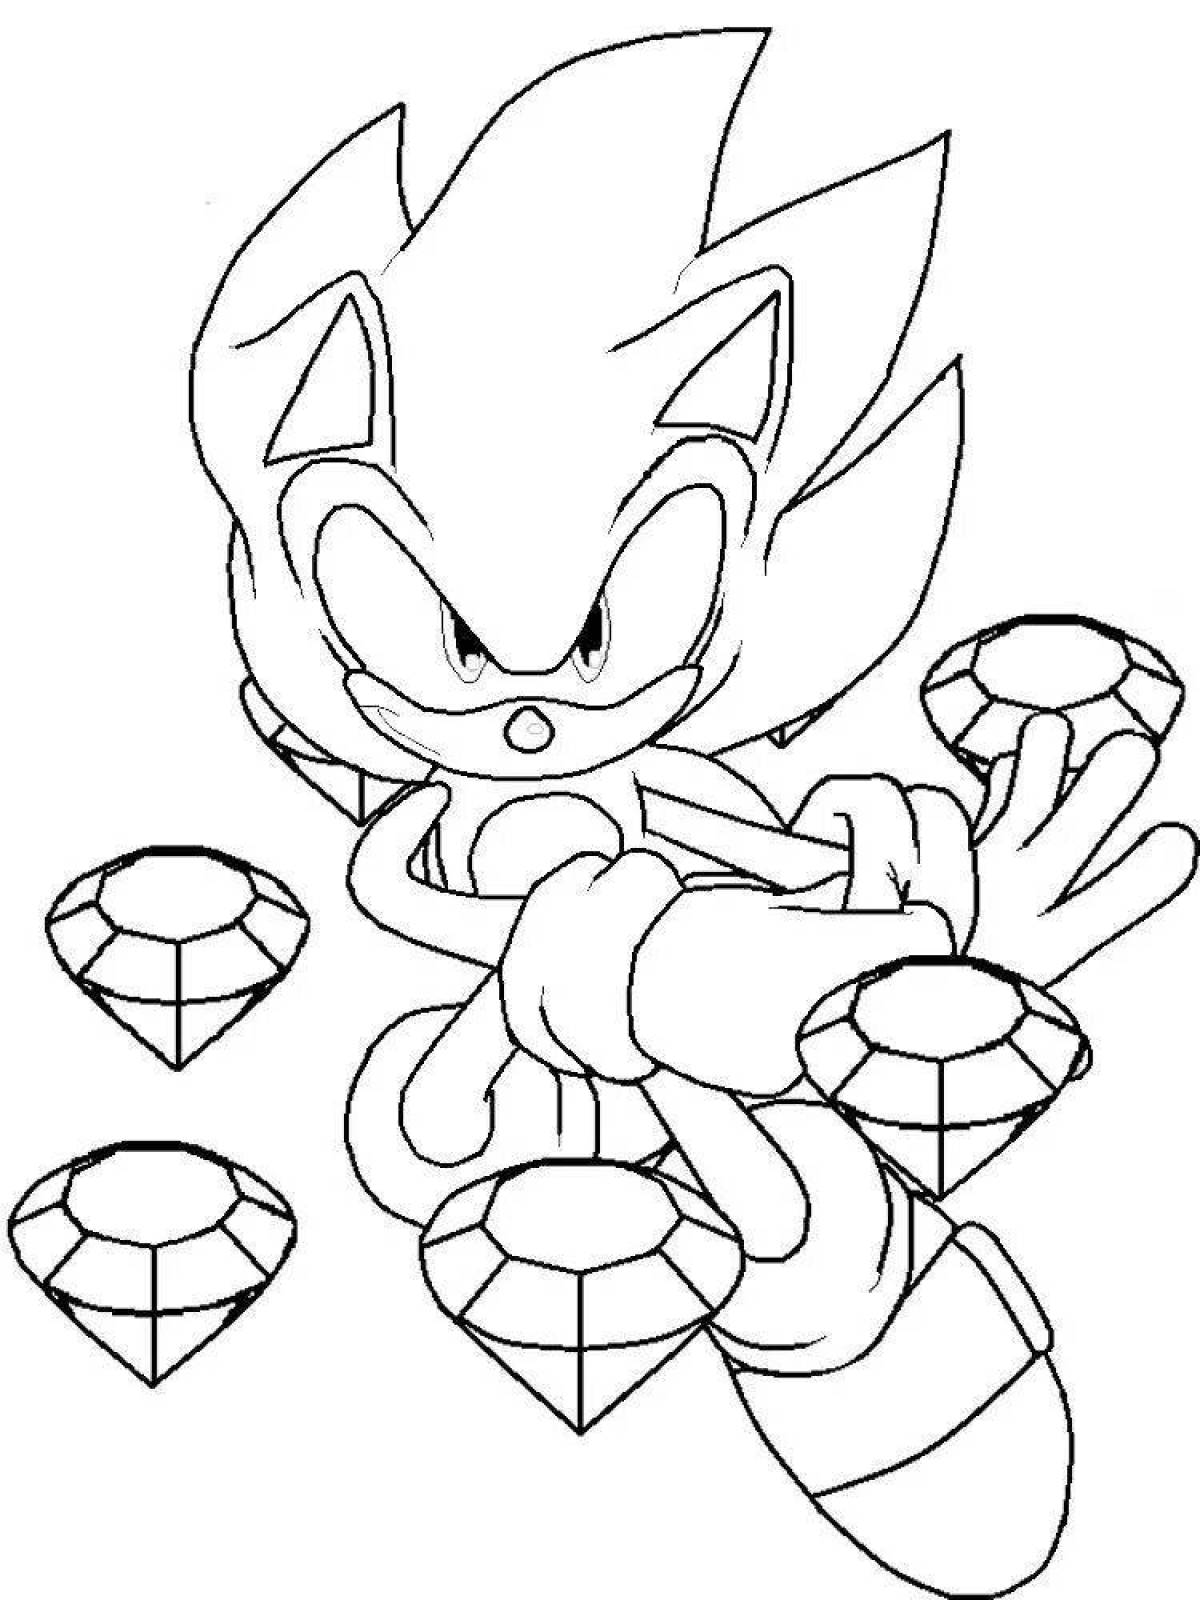 Exciting super sonic coloring book